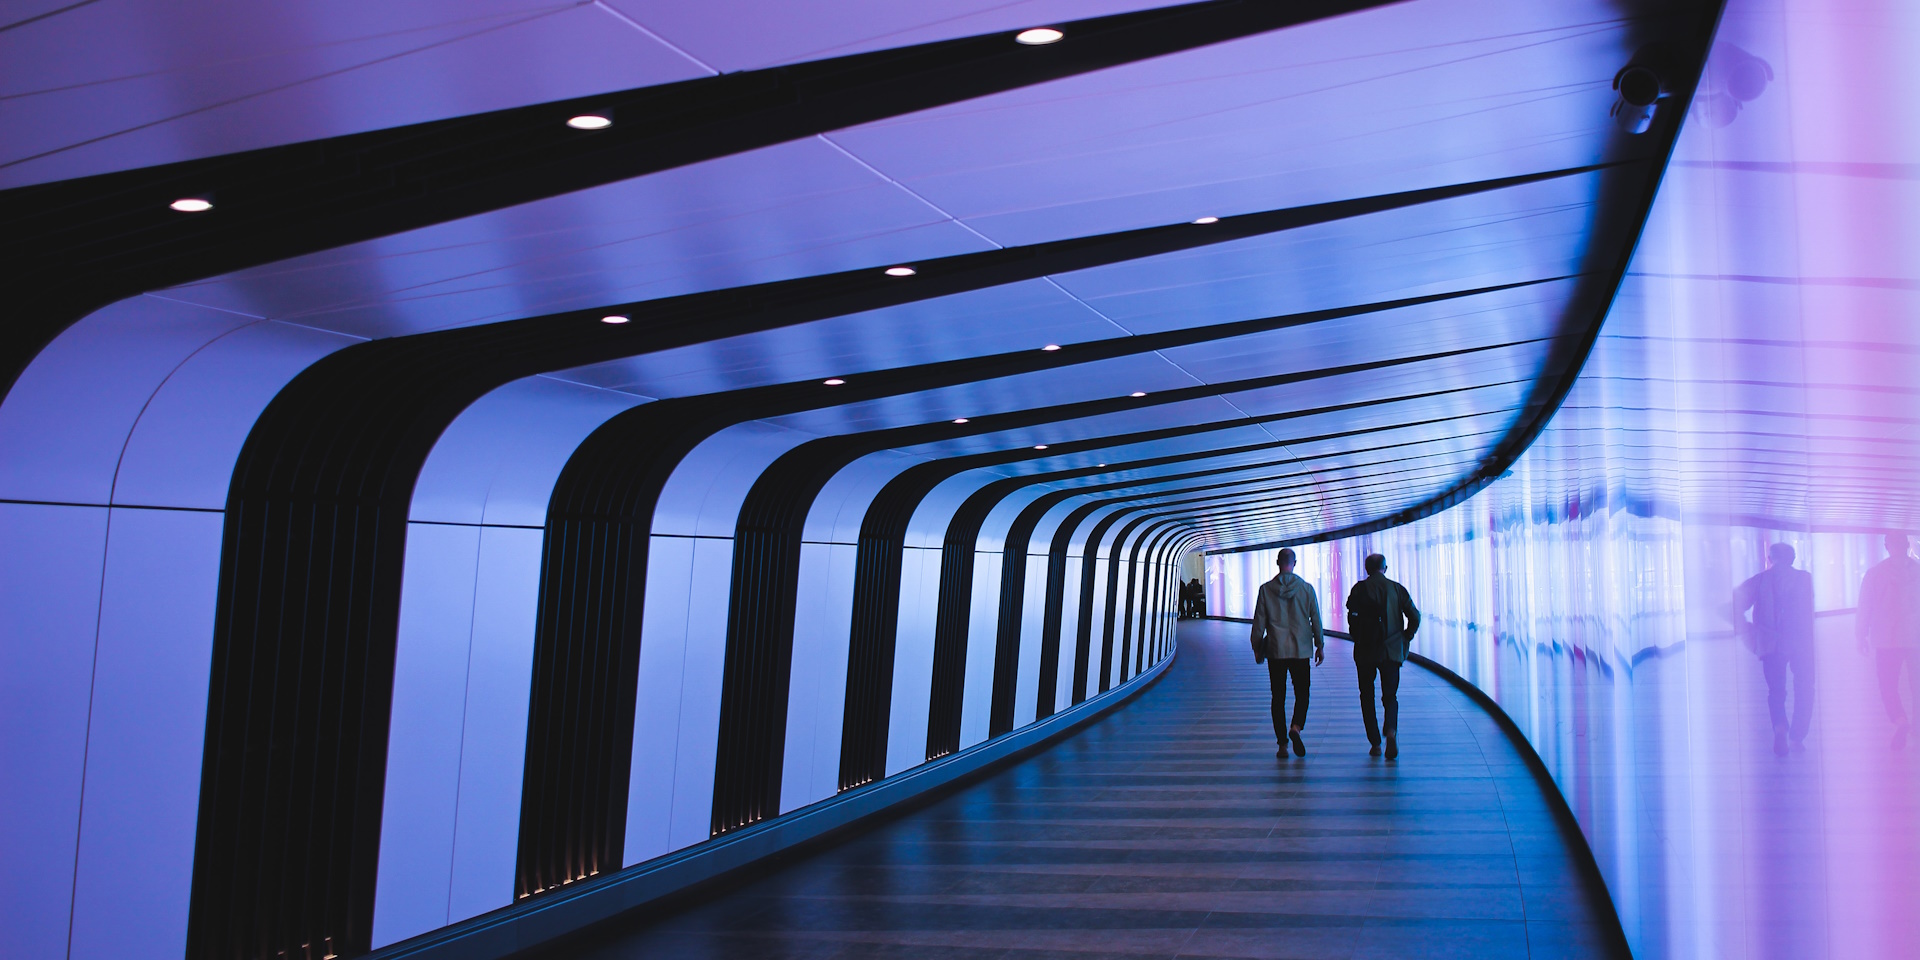 Two men walking in a hallway which has futuristic perspective with purple lighting and reflecting surfaces.